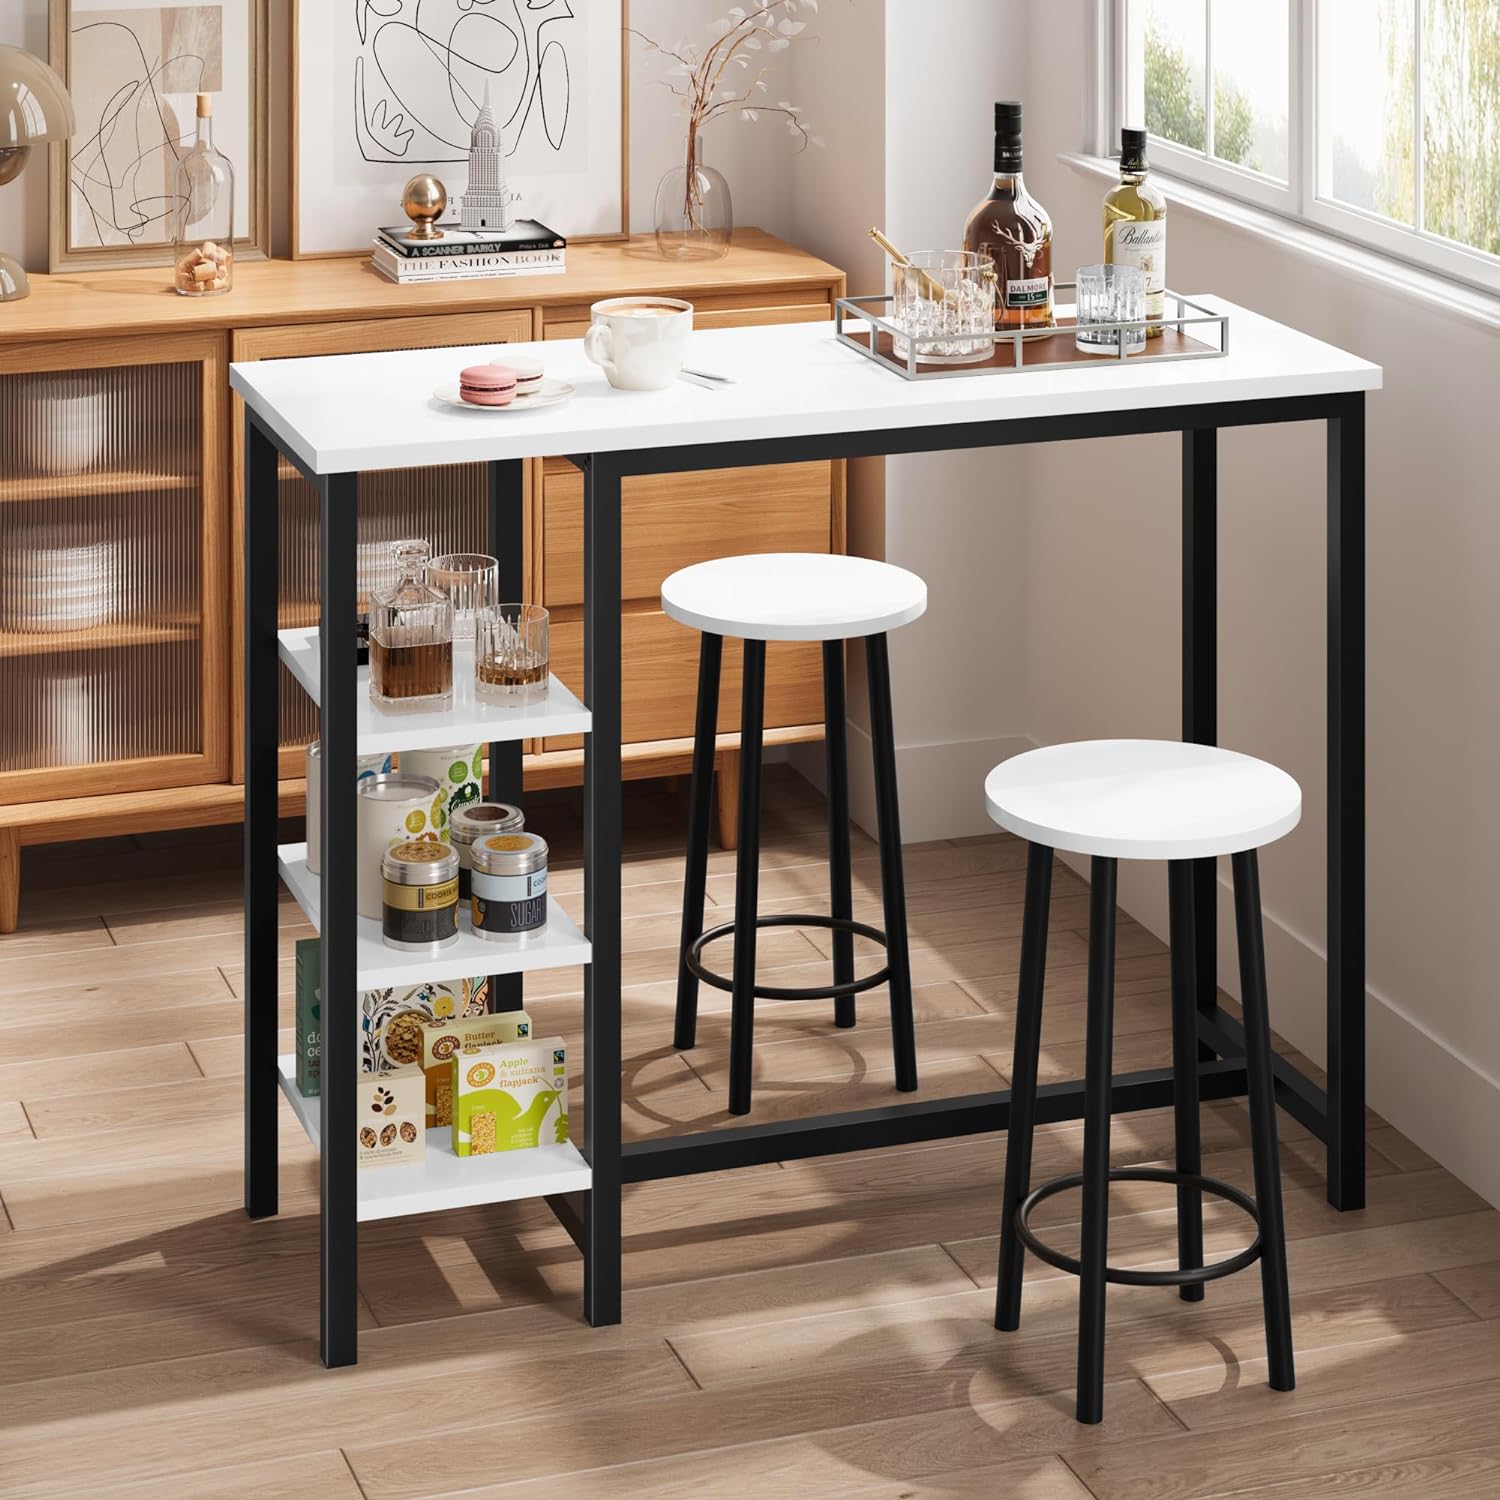 DHP 3-Piece Counter Height Dining Set with Storage, White - Walmart.com